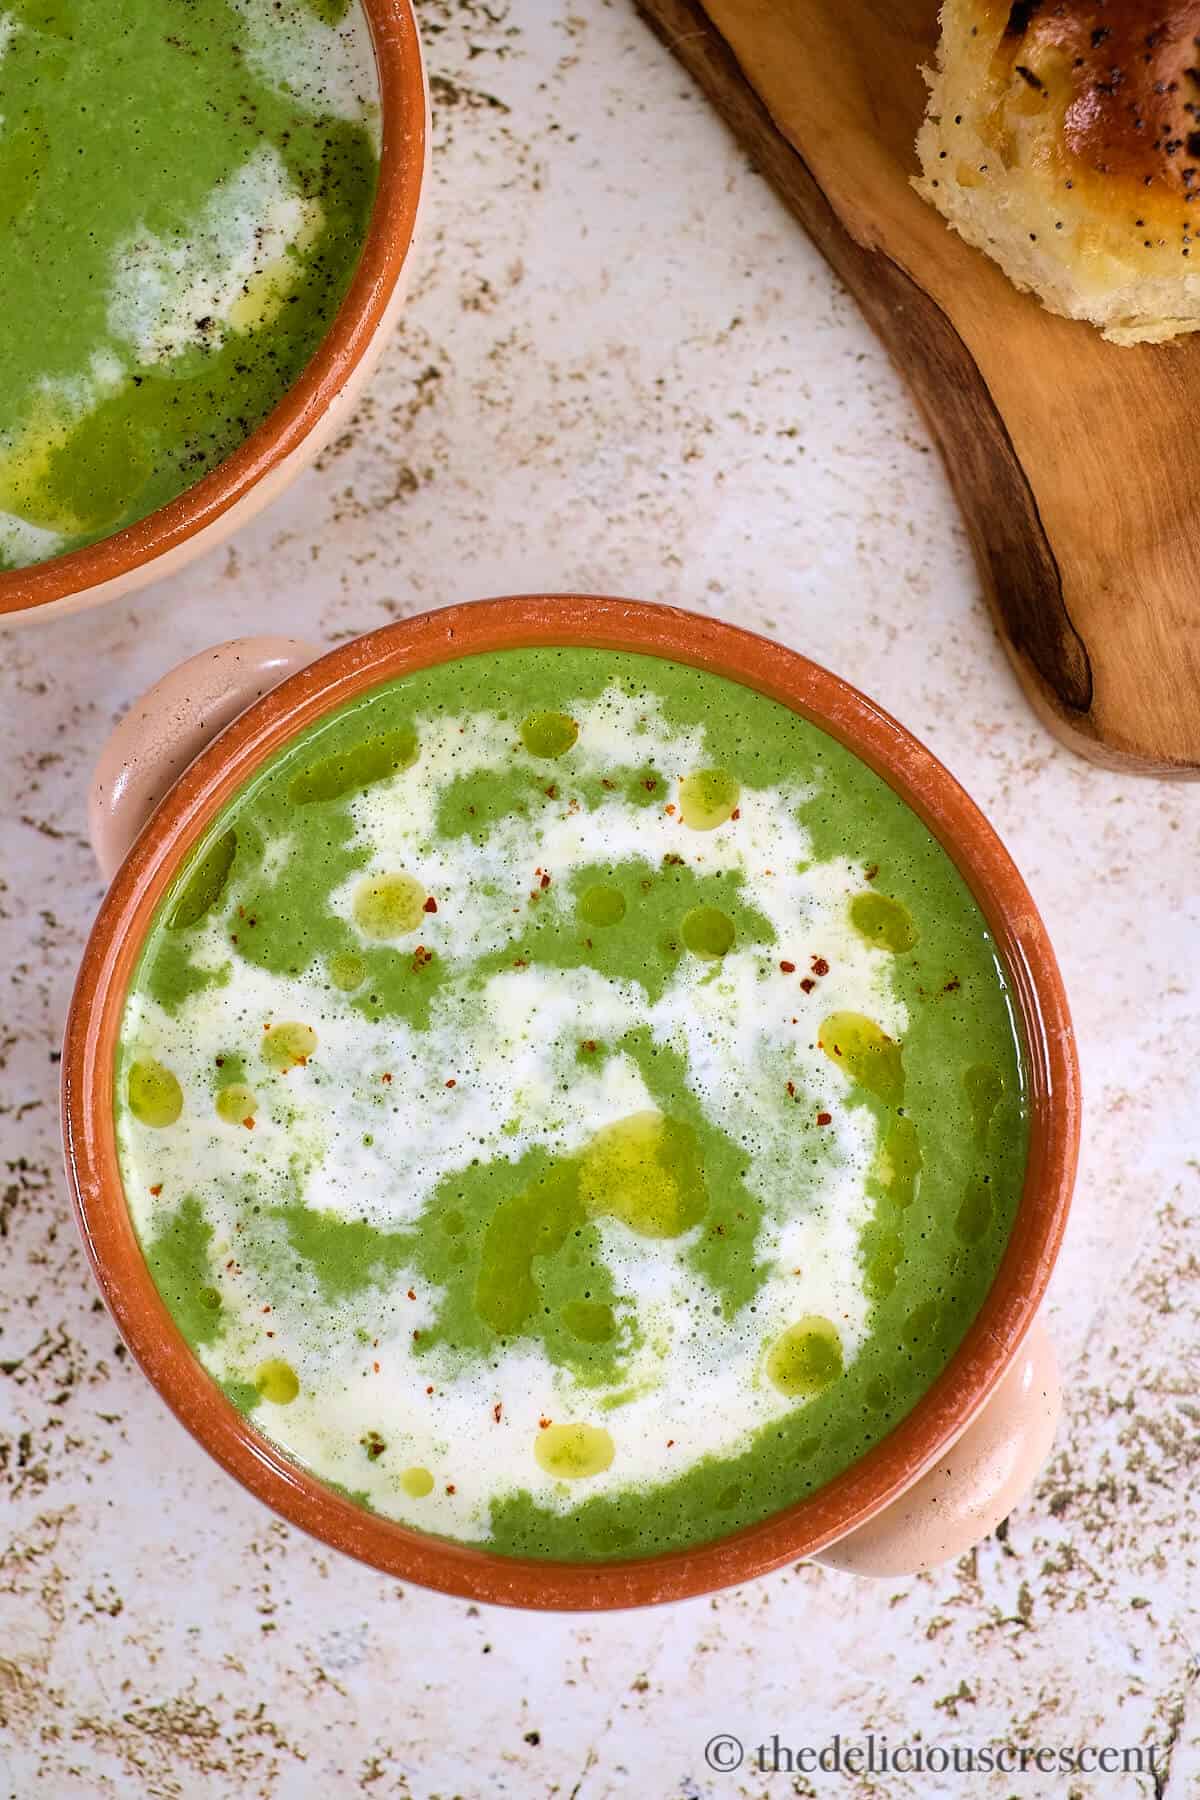 Creamy soup served in bowls.